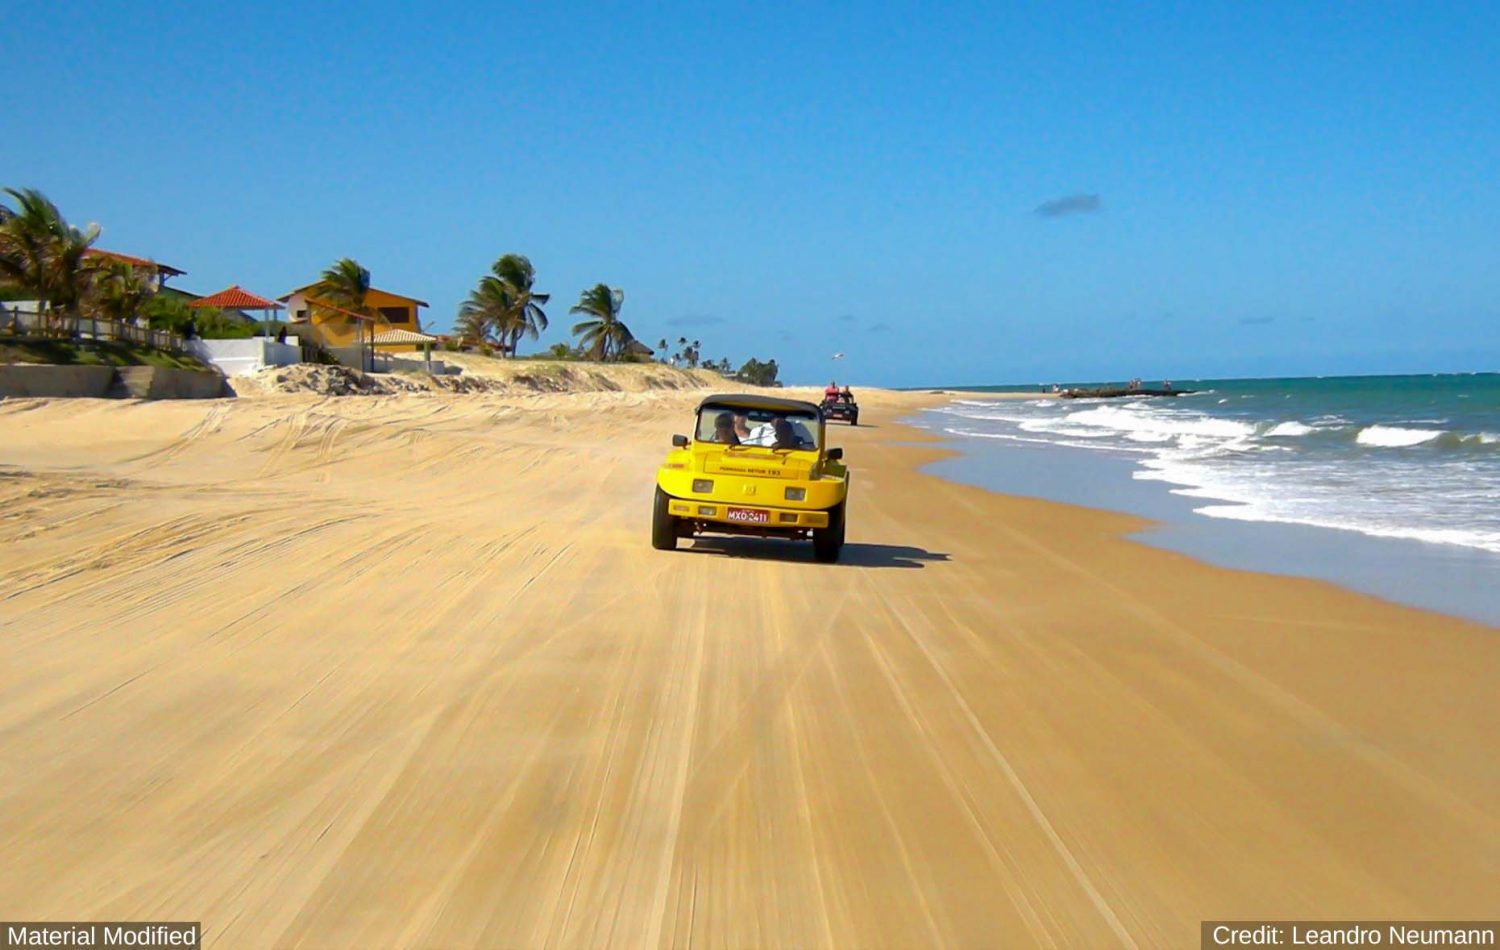 Mexico (Cancun & Yucatan): See & Experience it ALL in 6 Days, 1st Class Custom Tours